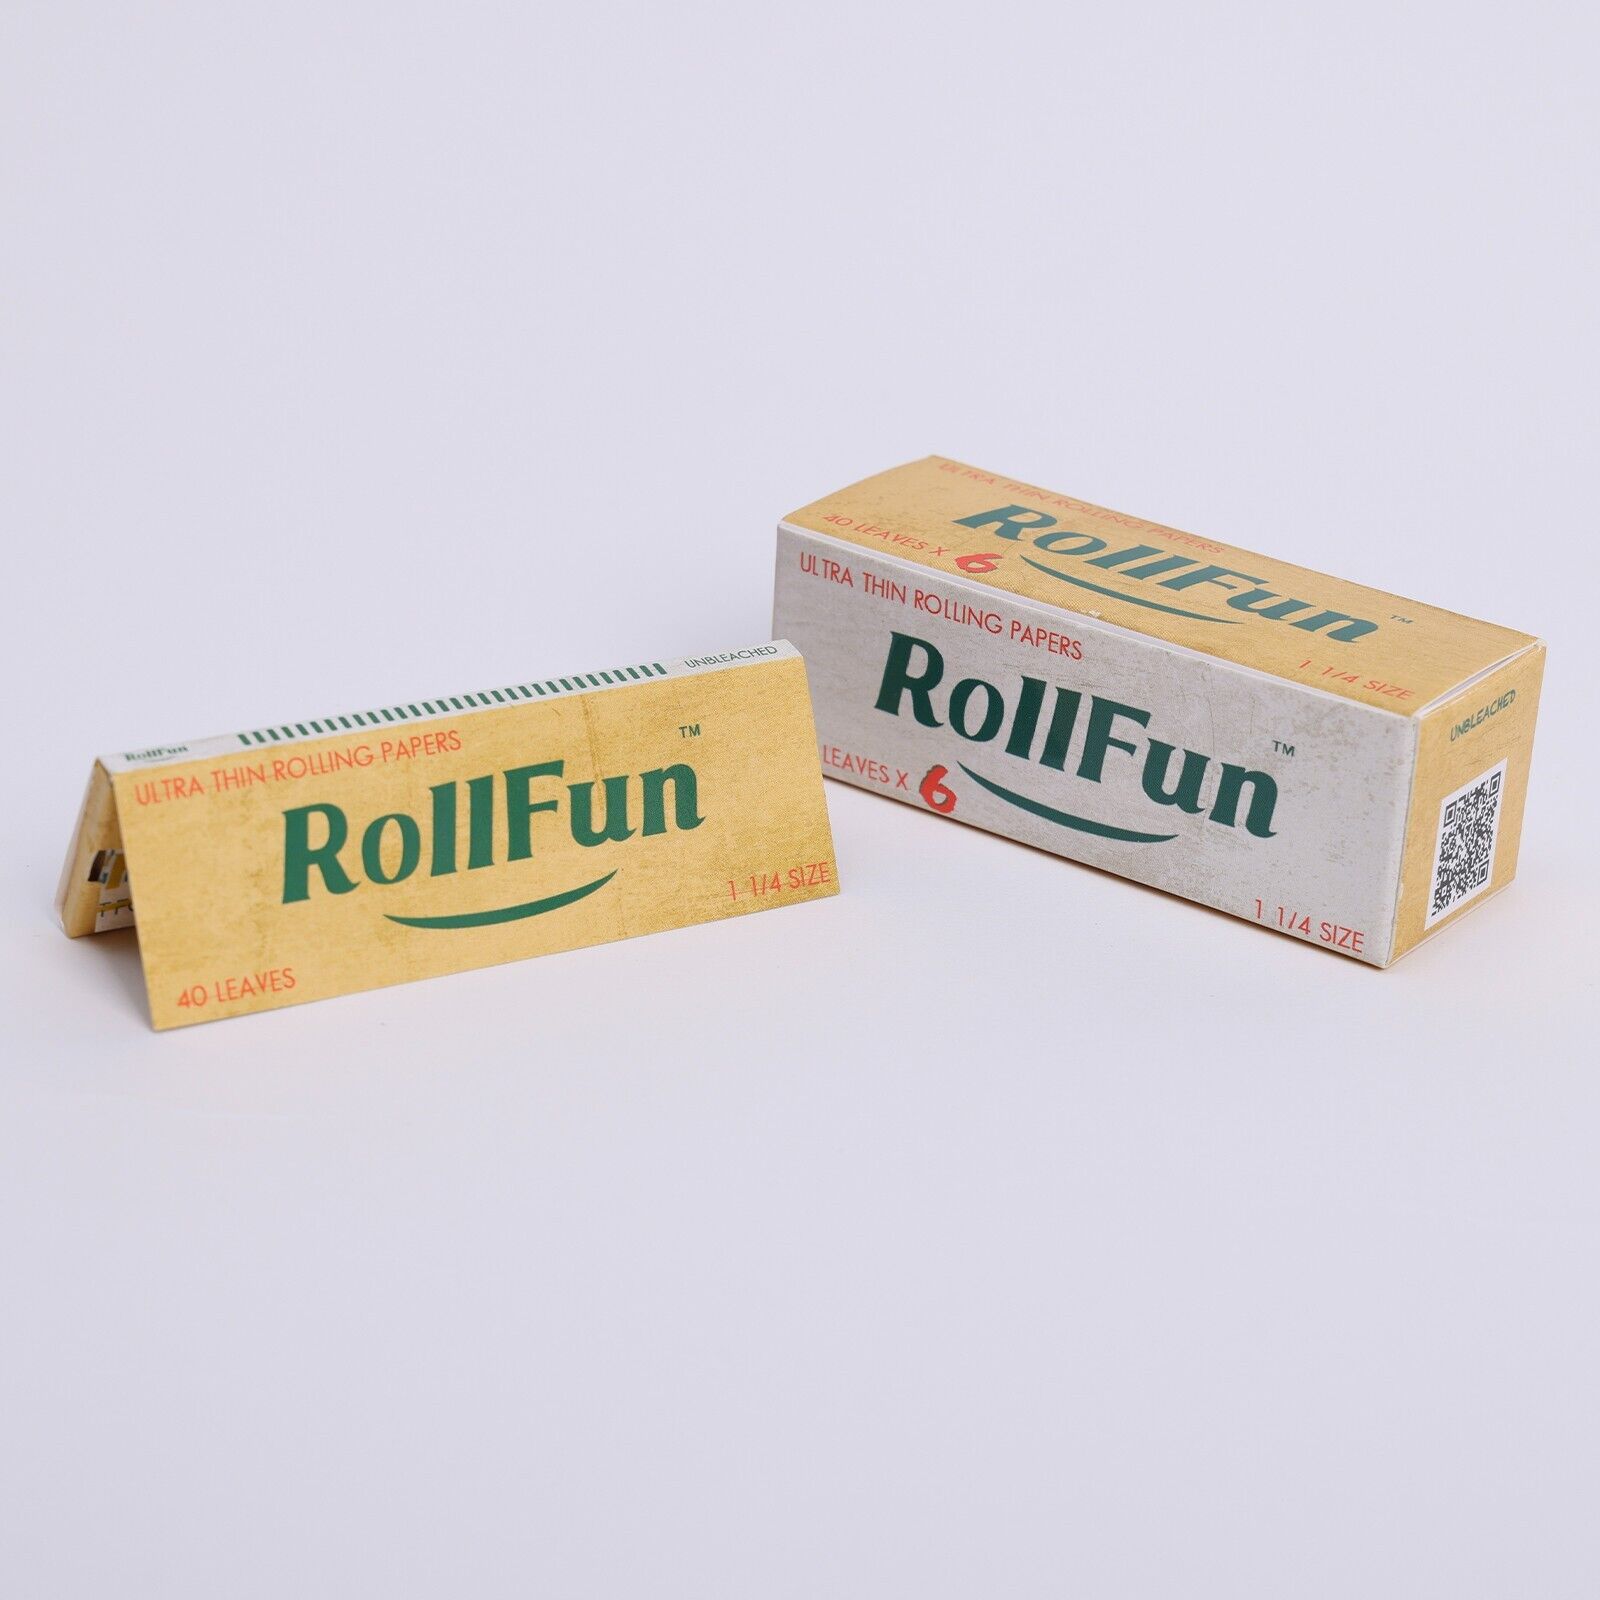 RollFun Unbleached Rolling Paper Cigarette 1.25 1 1/4 Size 40 Leaves 6 Booklets